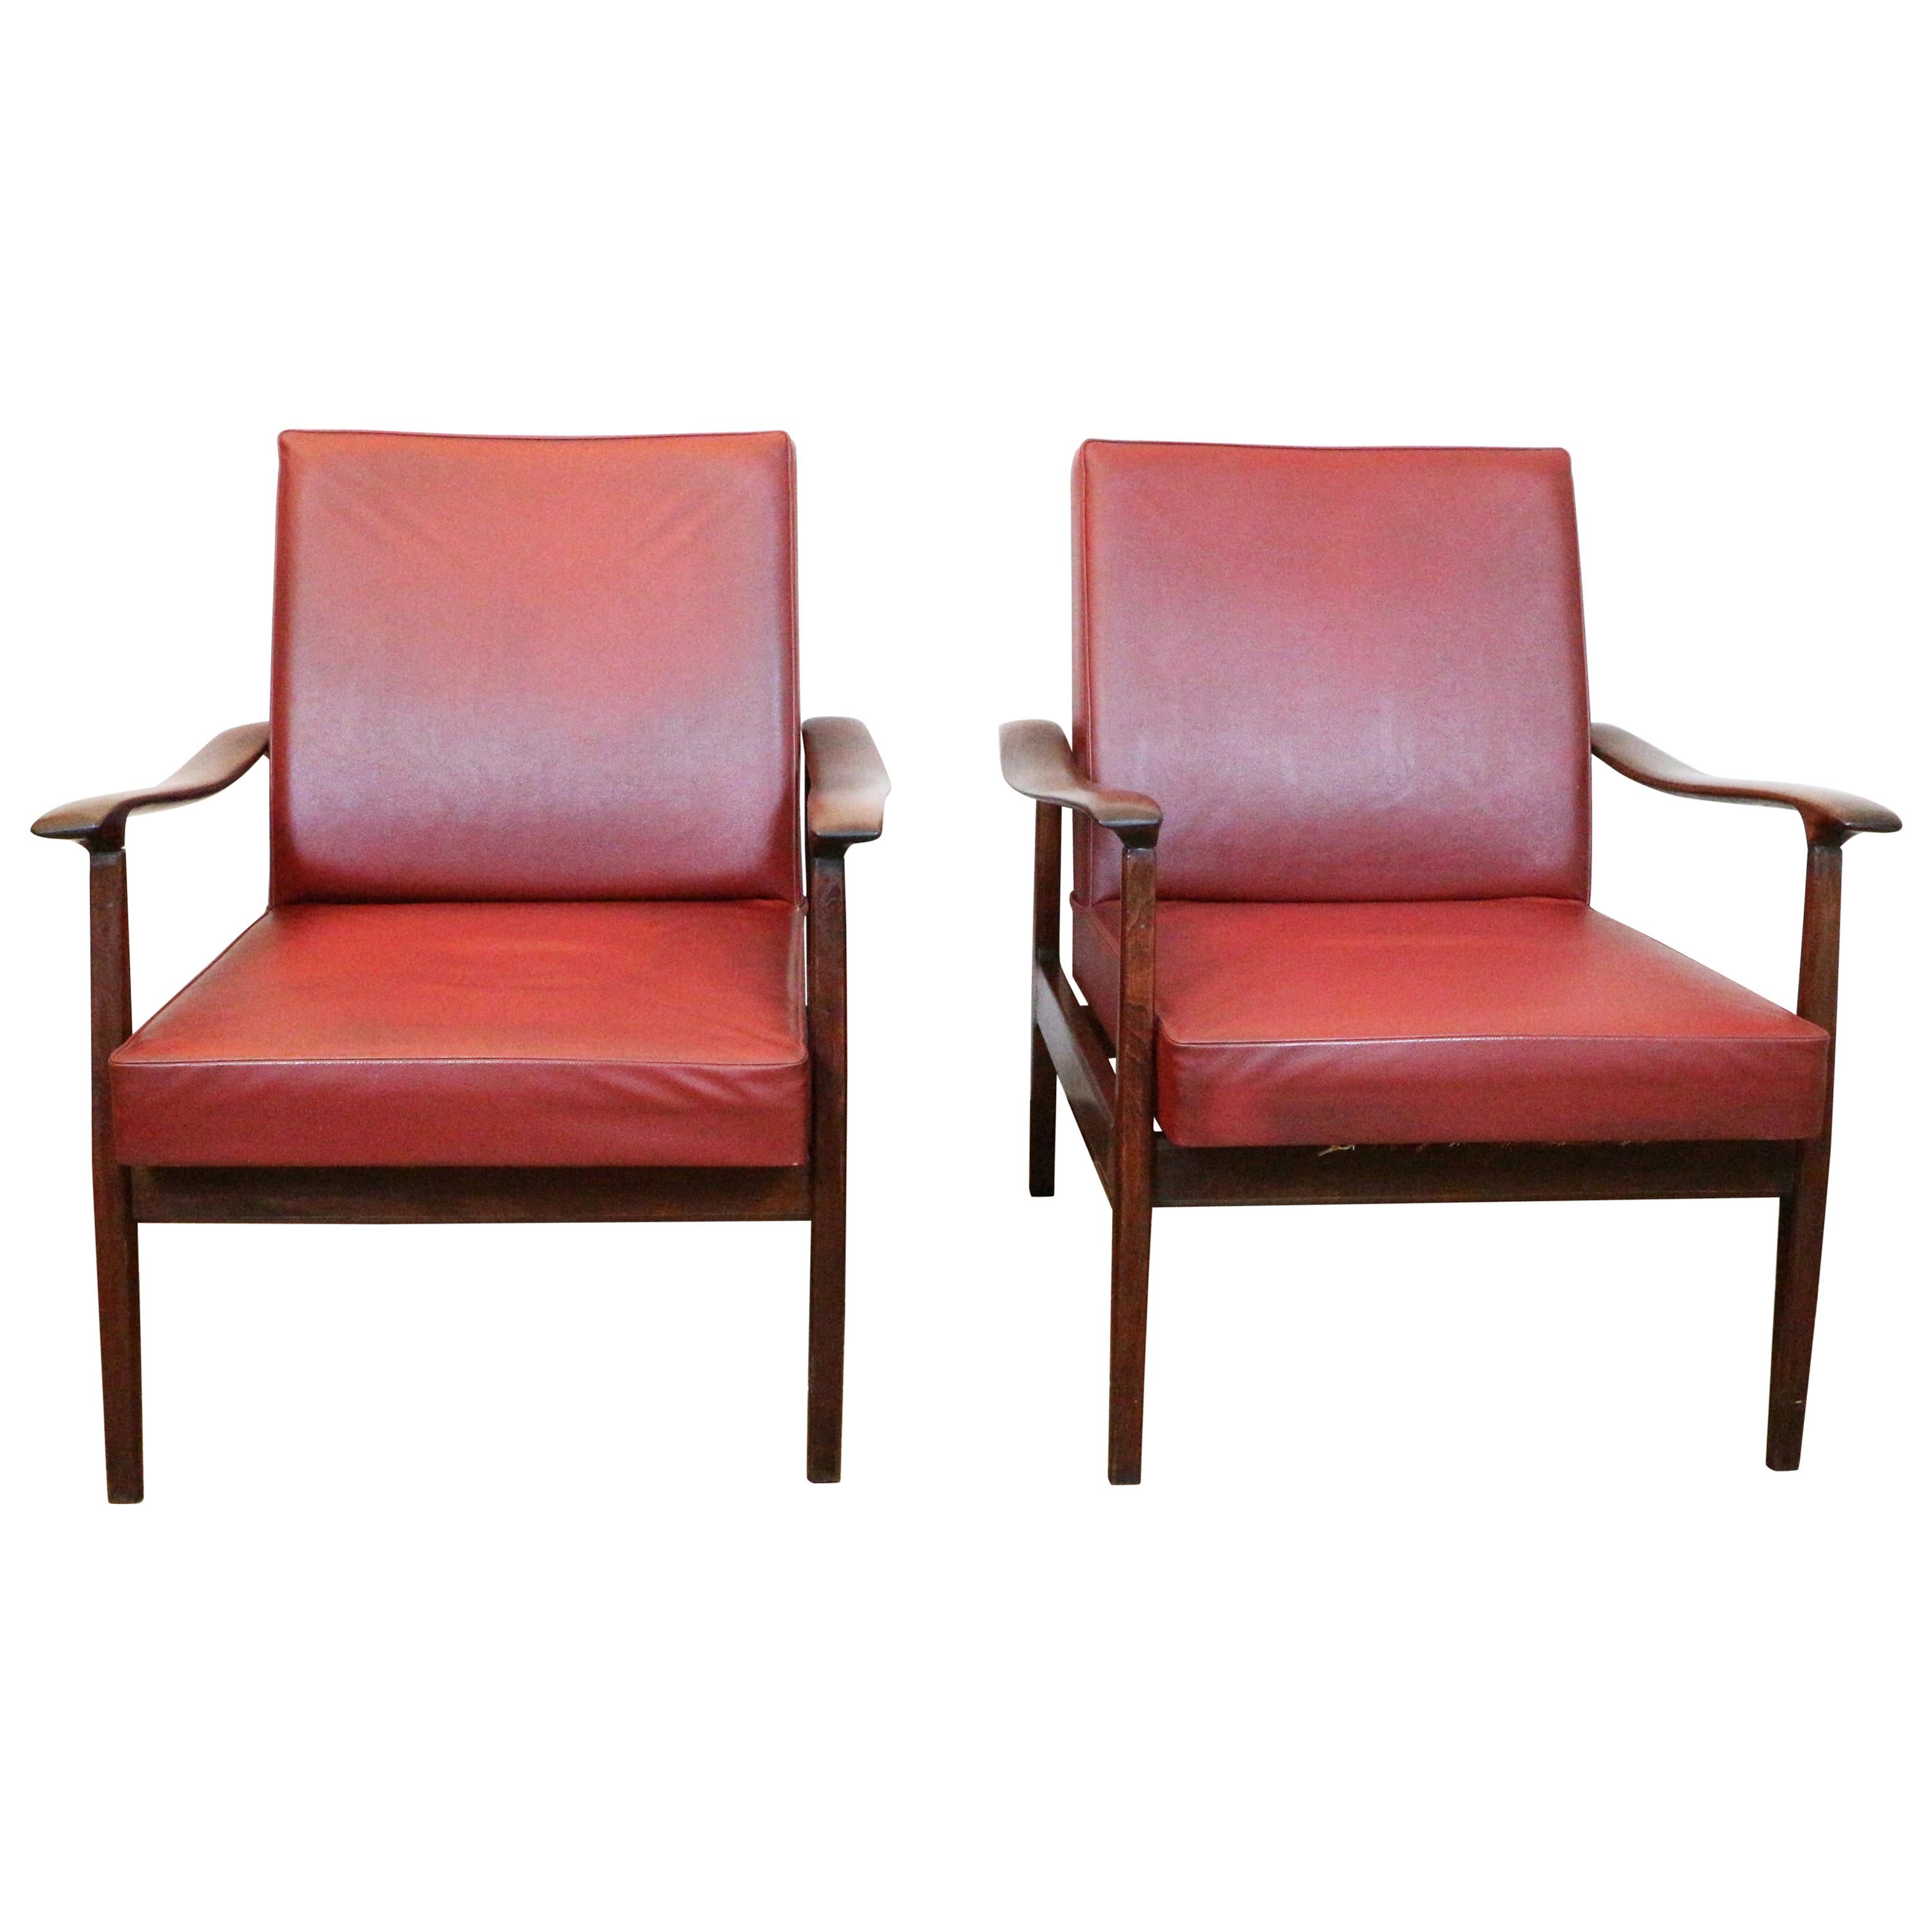 Pair of Italian Armchairs Produced by Anonima Castelli, 1960s For Sale